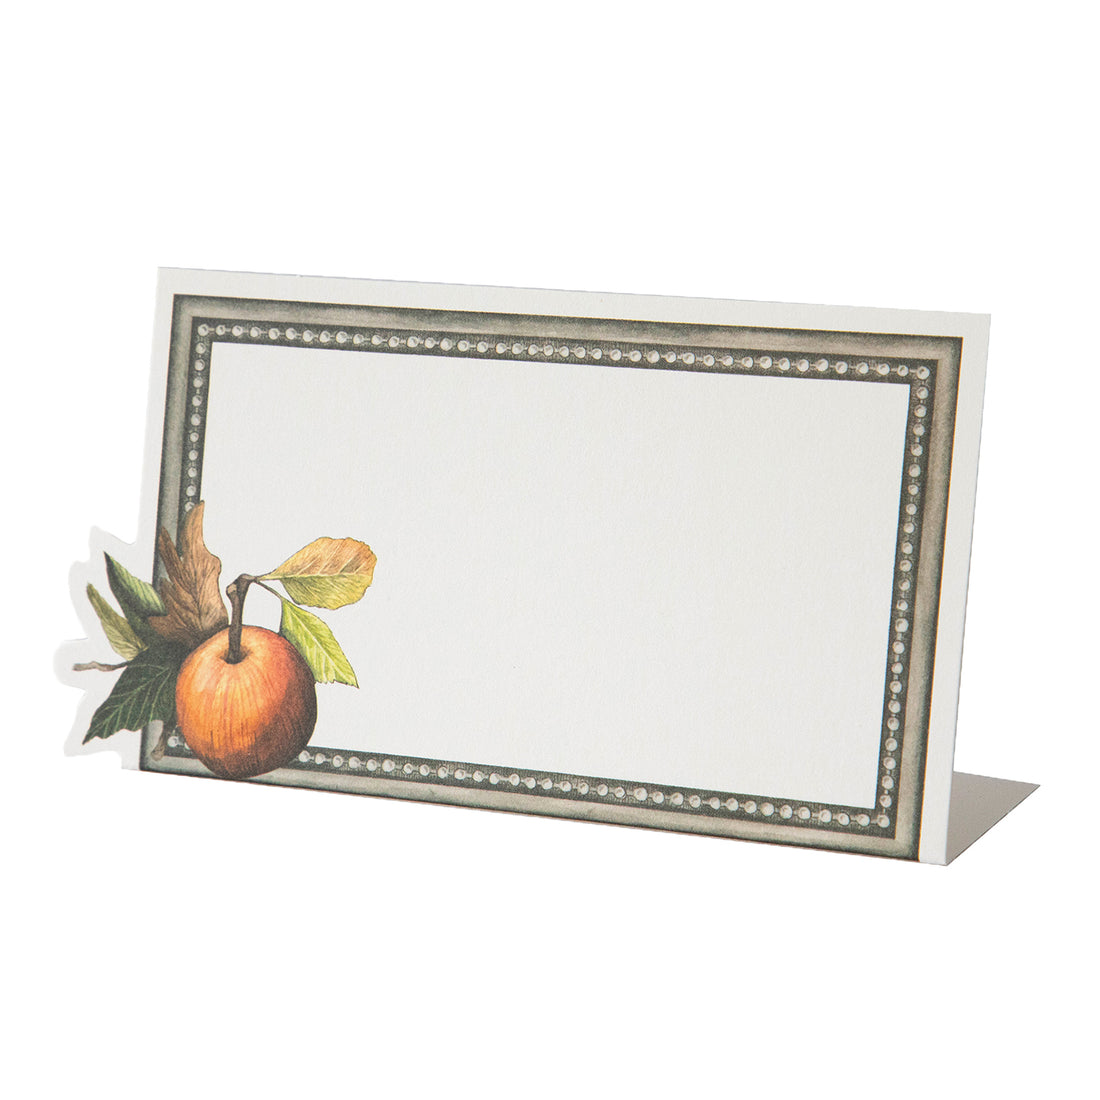 A white, rectangular freestanding place card featuring an ornate gray frame and a vibrant orange apple with leaved adorning the lower left corner.